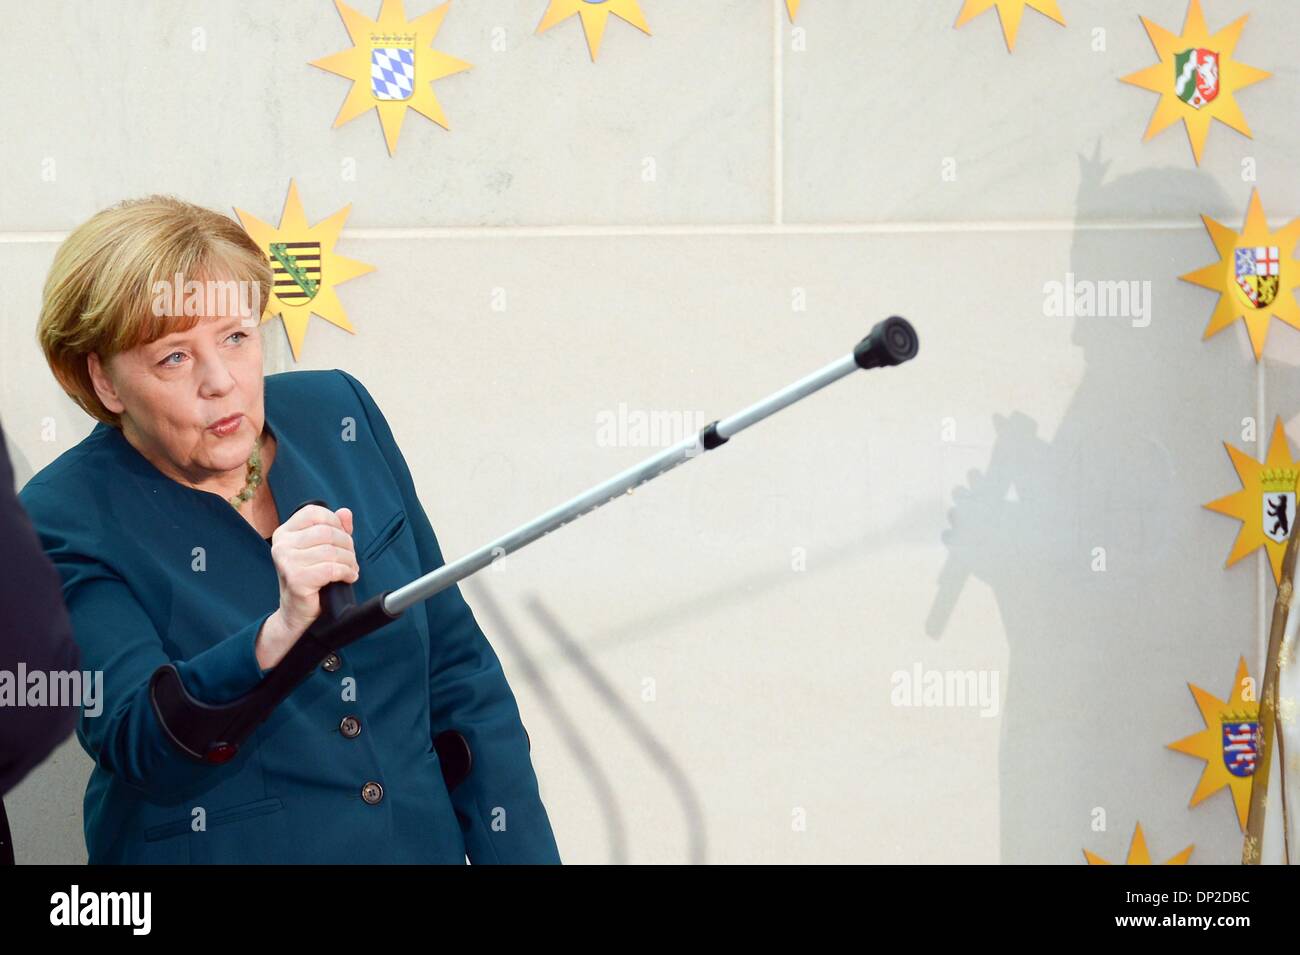 Berlin, Germany. 7th Jan, 2014. German Chancellor Angela Merkel uses crutches during the annual reception for Carolers at the chancellery in Berlin, Tuesday Jan. 7, 2014. German Chancellor Angela Merkel suffered a pelvis injury during ski holidays in the Swiss Alps and will have to cut back on her work schedule for the next three weeks. The signs show the different German cities the Carolers are coming from. Credit:  Goncalo Silva/NurPhoto/ZUMAPRESS.com/Alamy Live News Stock Photo